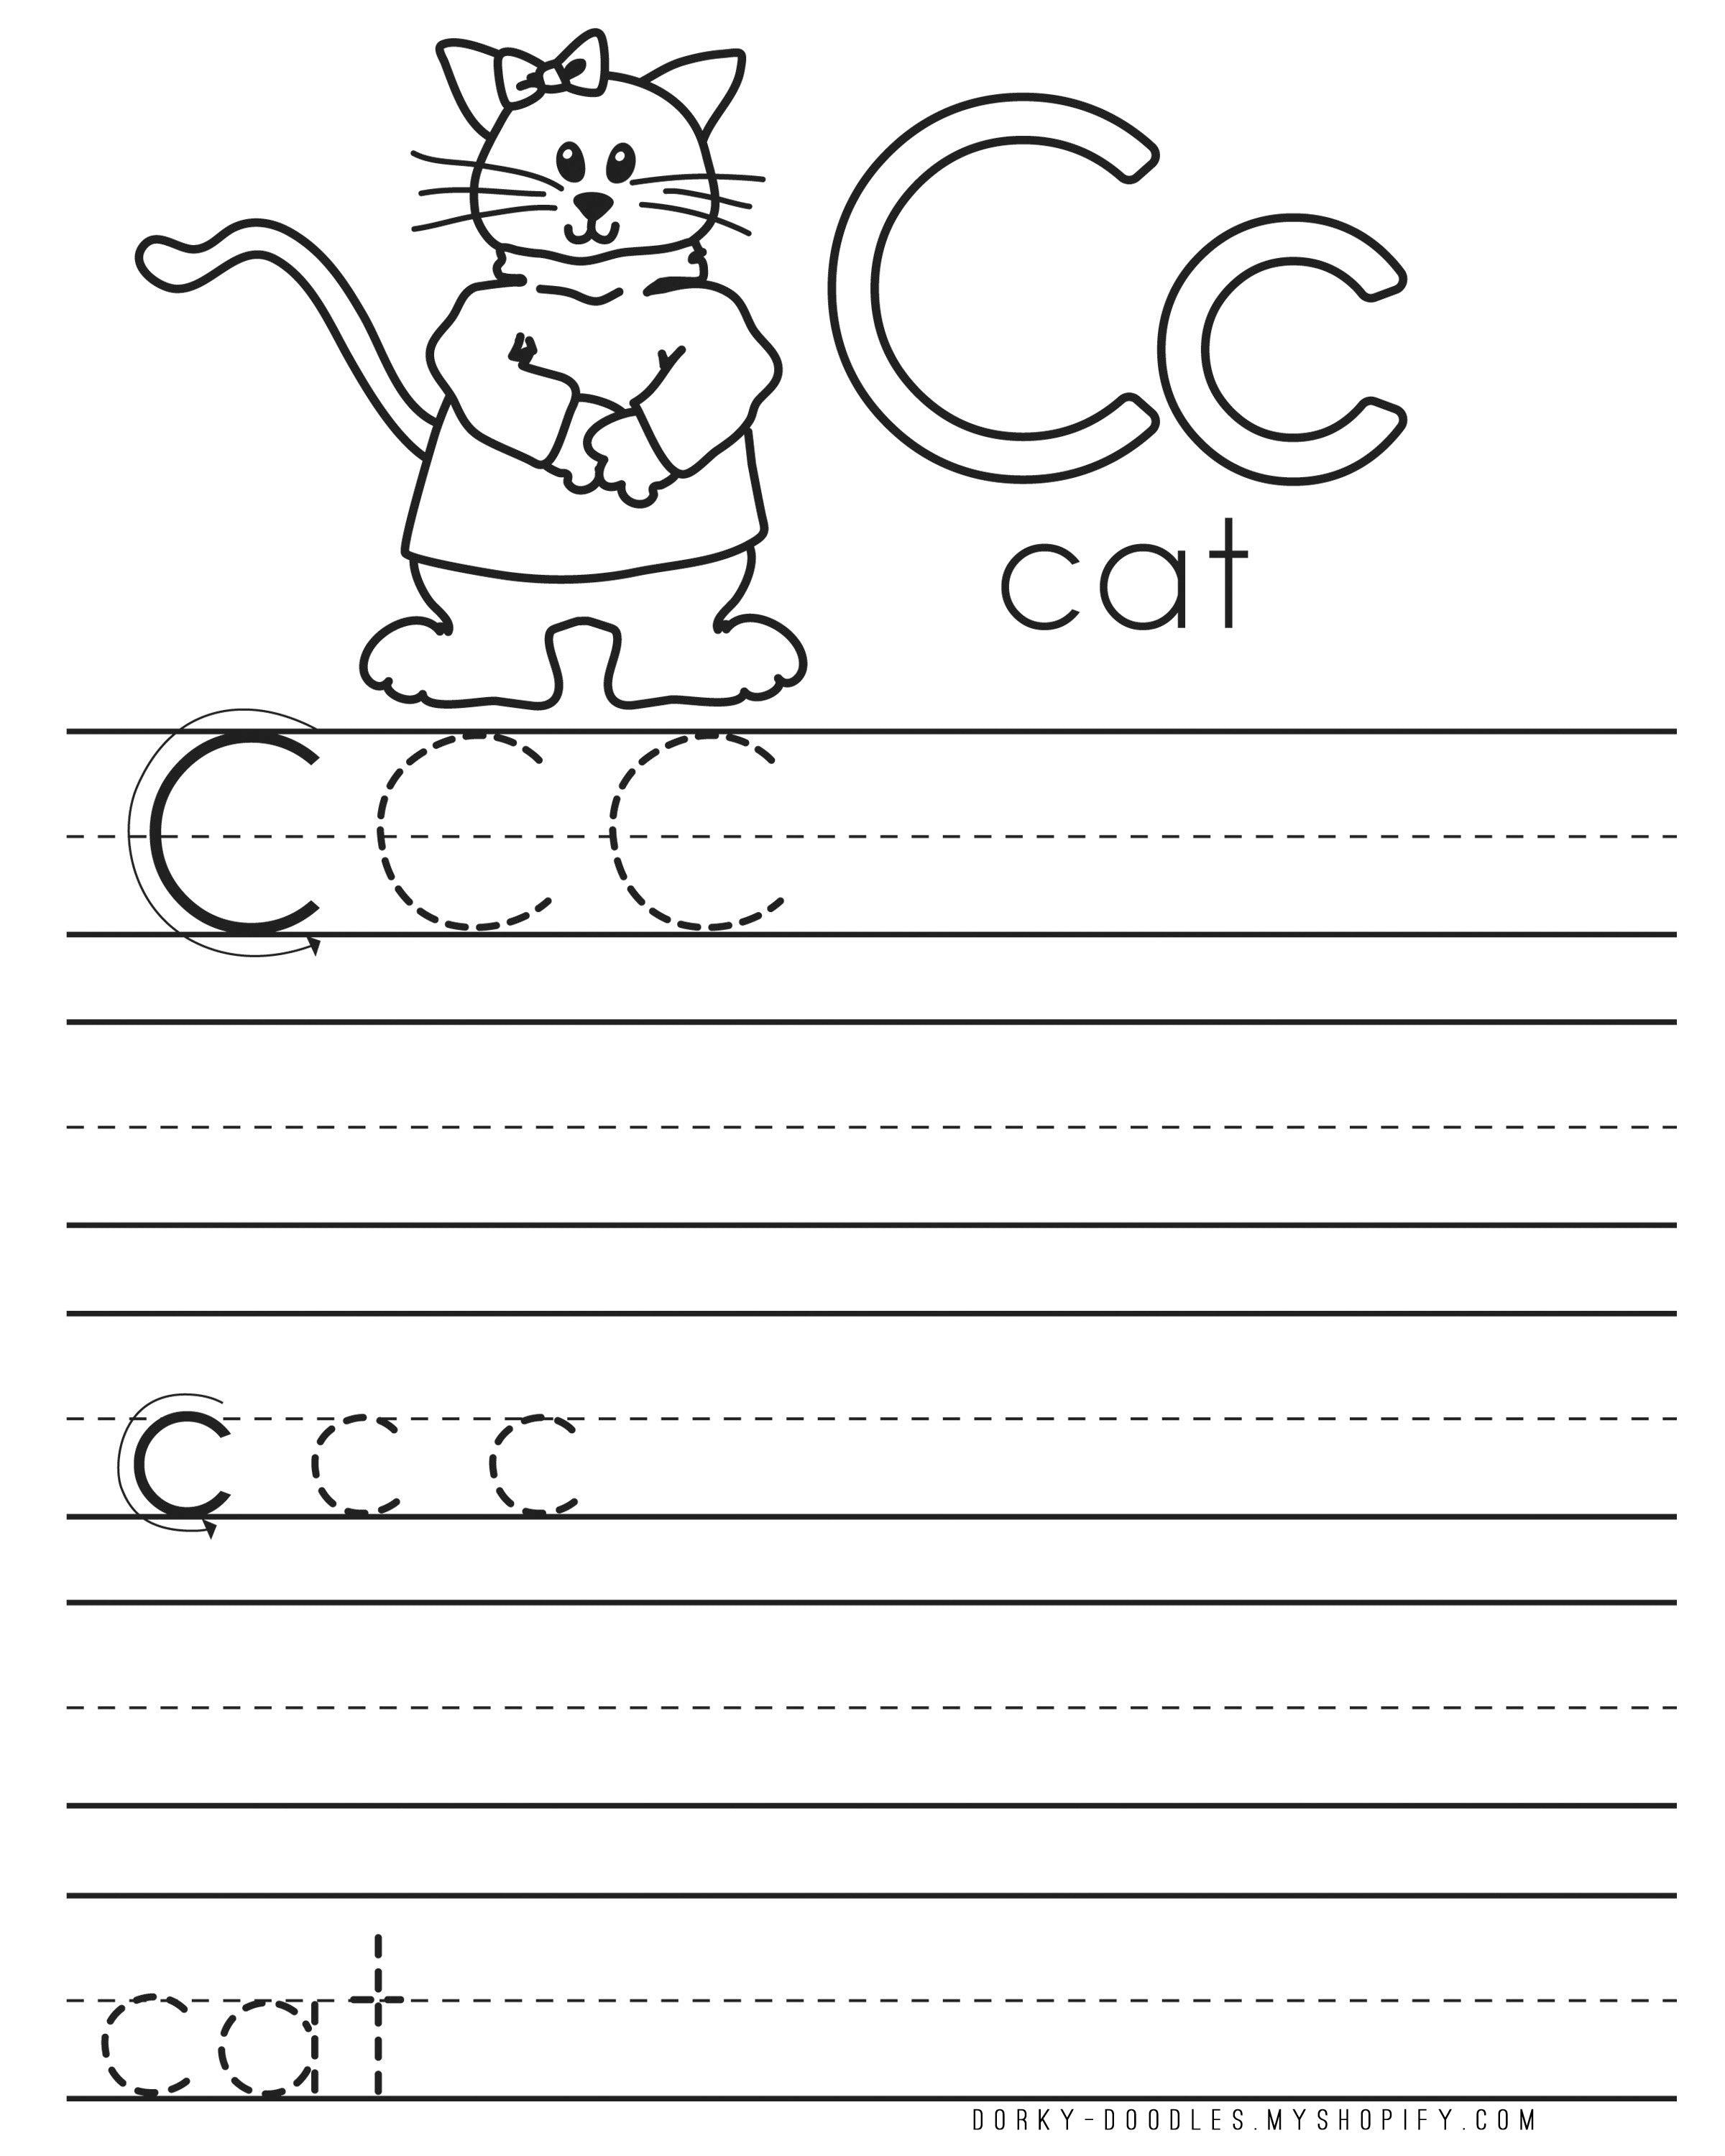 c-and-k-worksheets-free-download-goodimg-co